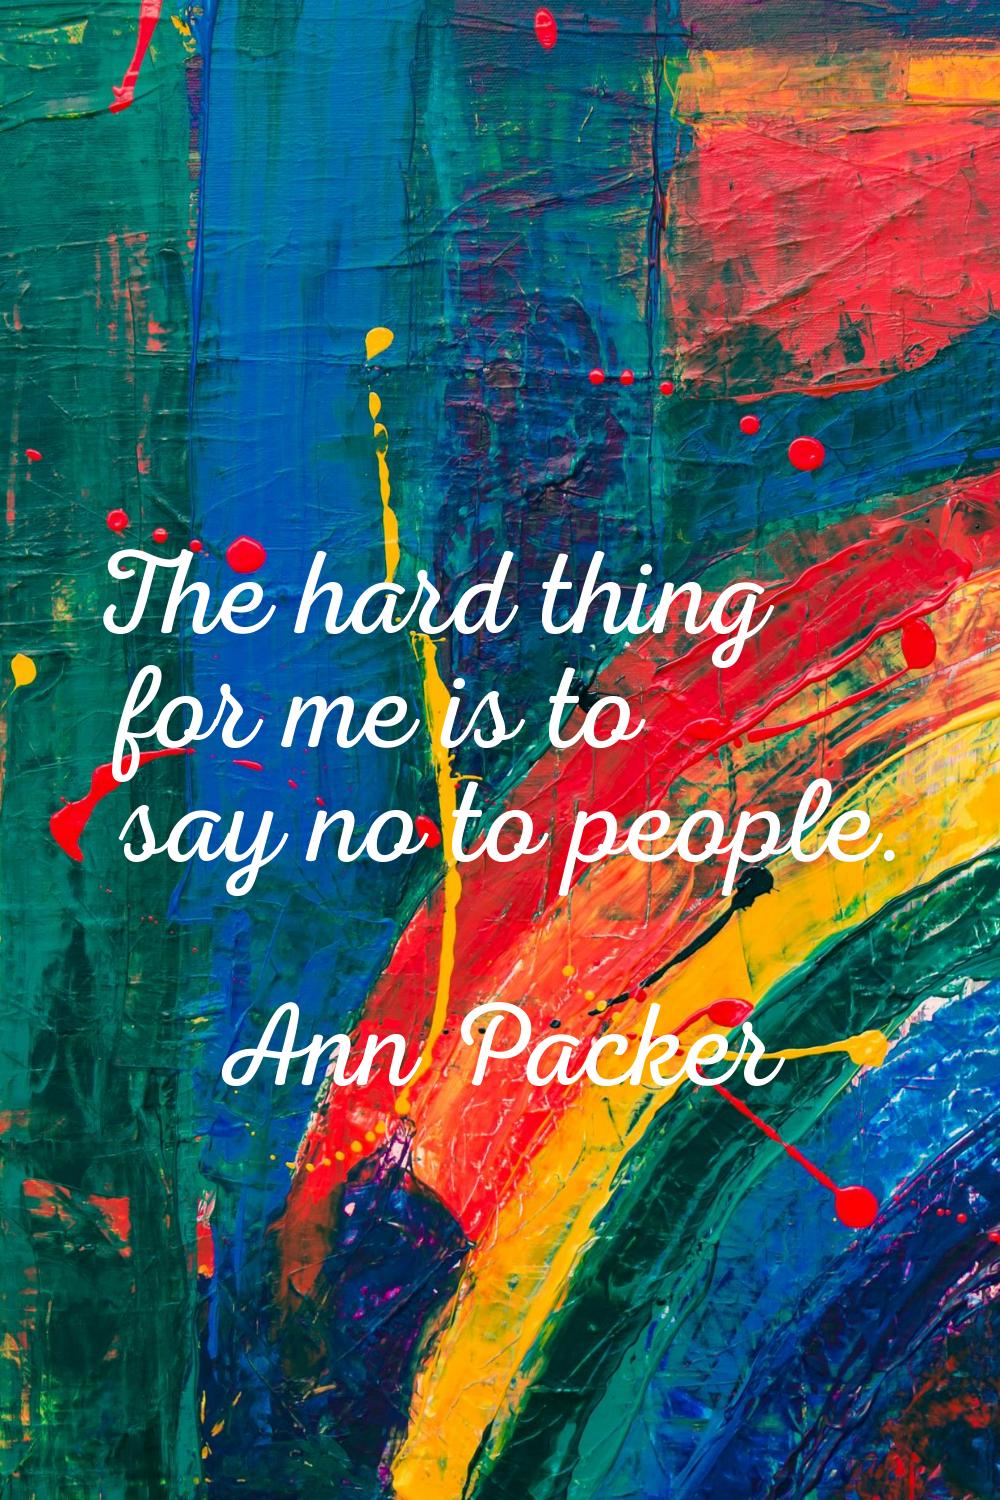 The hard thing for me is to say no to people.